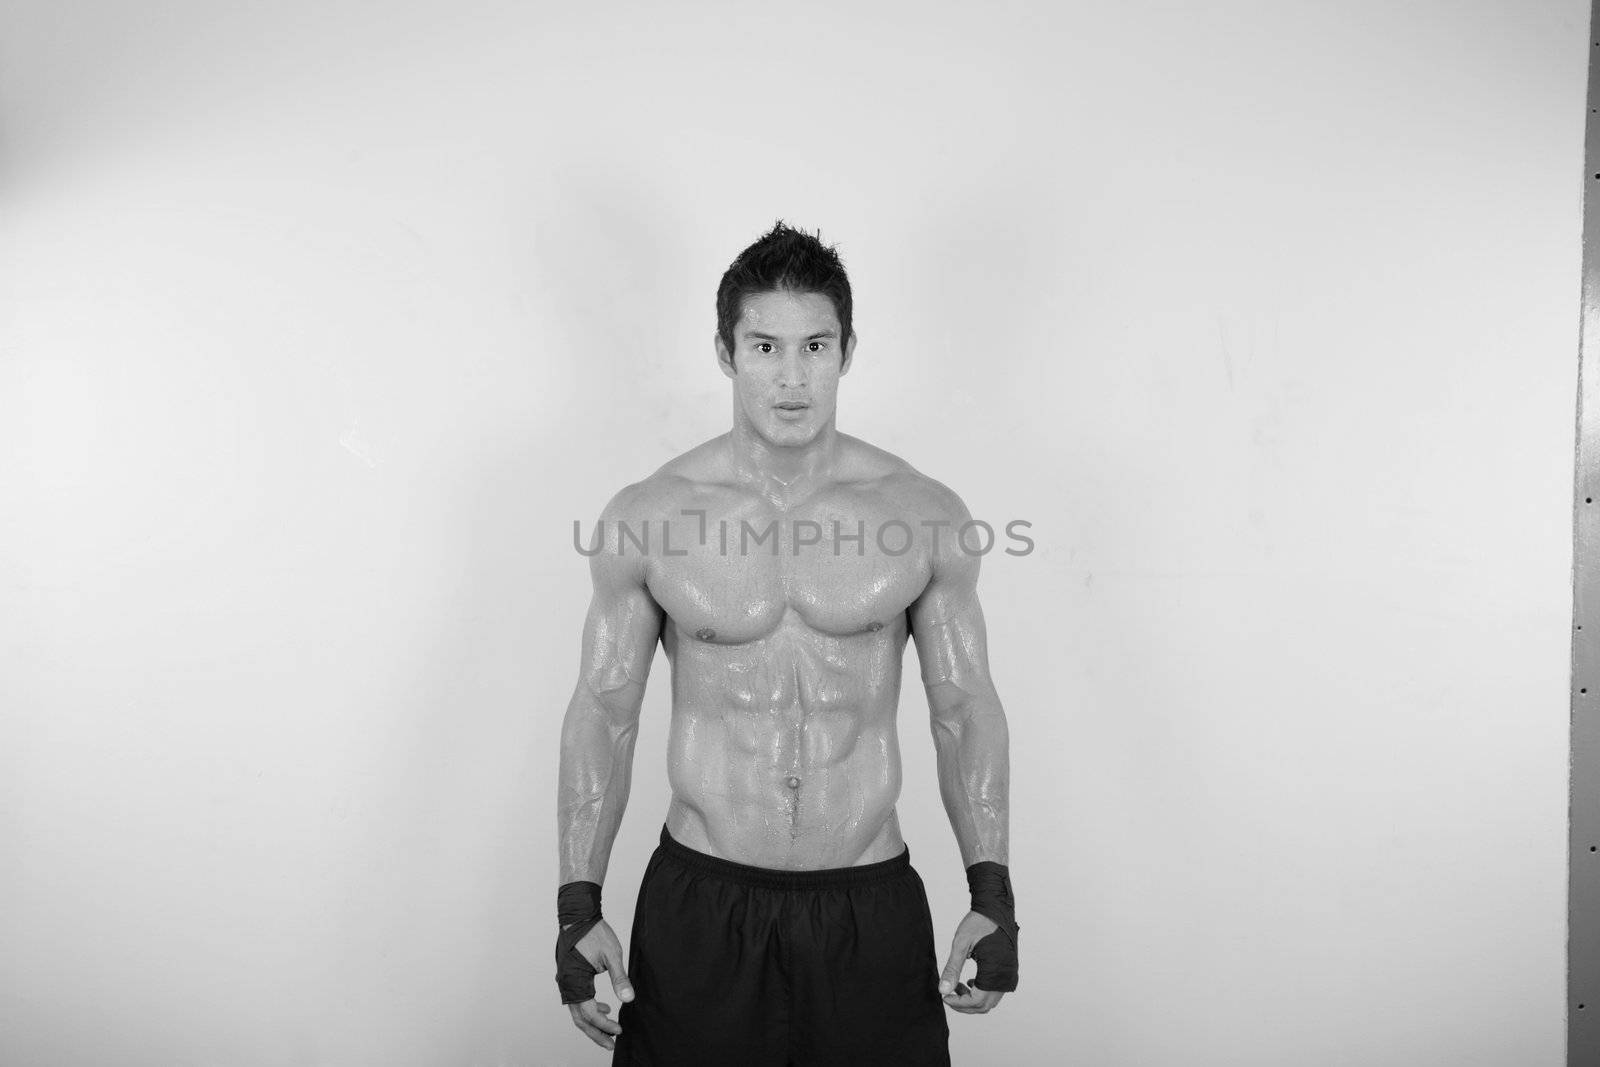 image of muscle man posing in gym